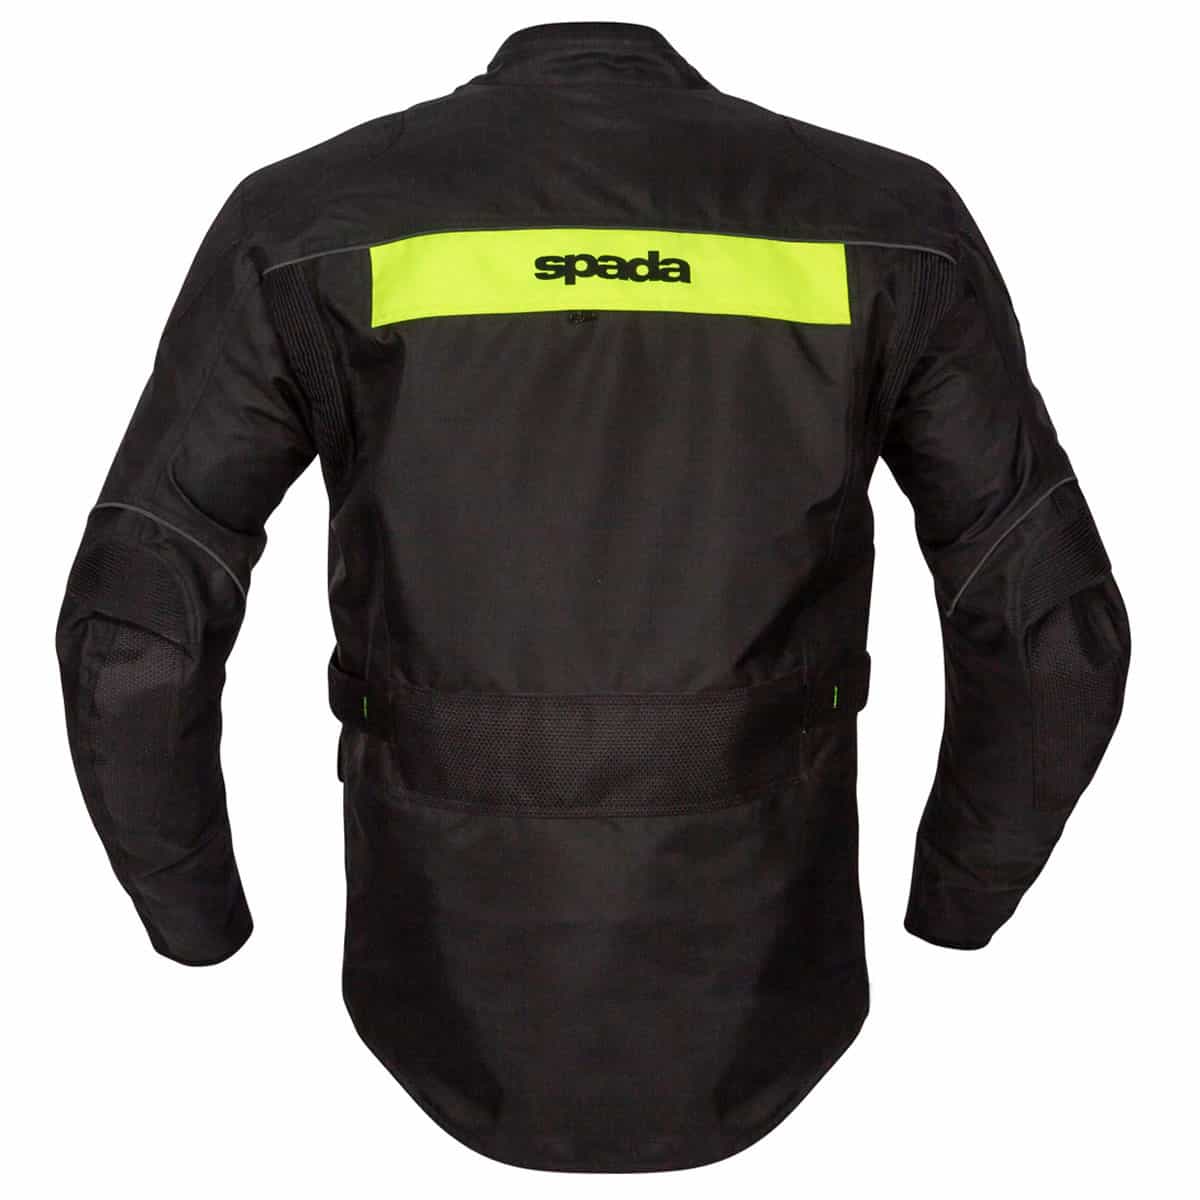 The Zorst from Spada packs plenty of features into a very well-priced jacket 3